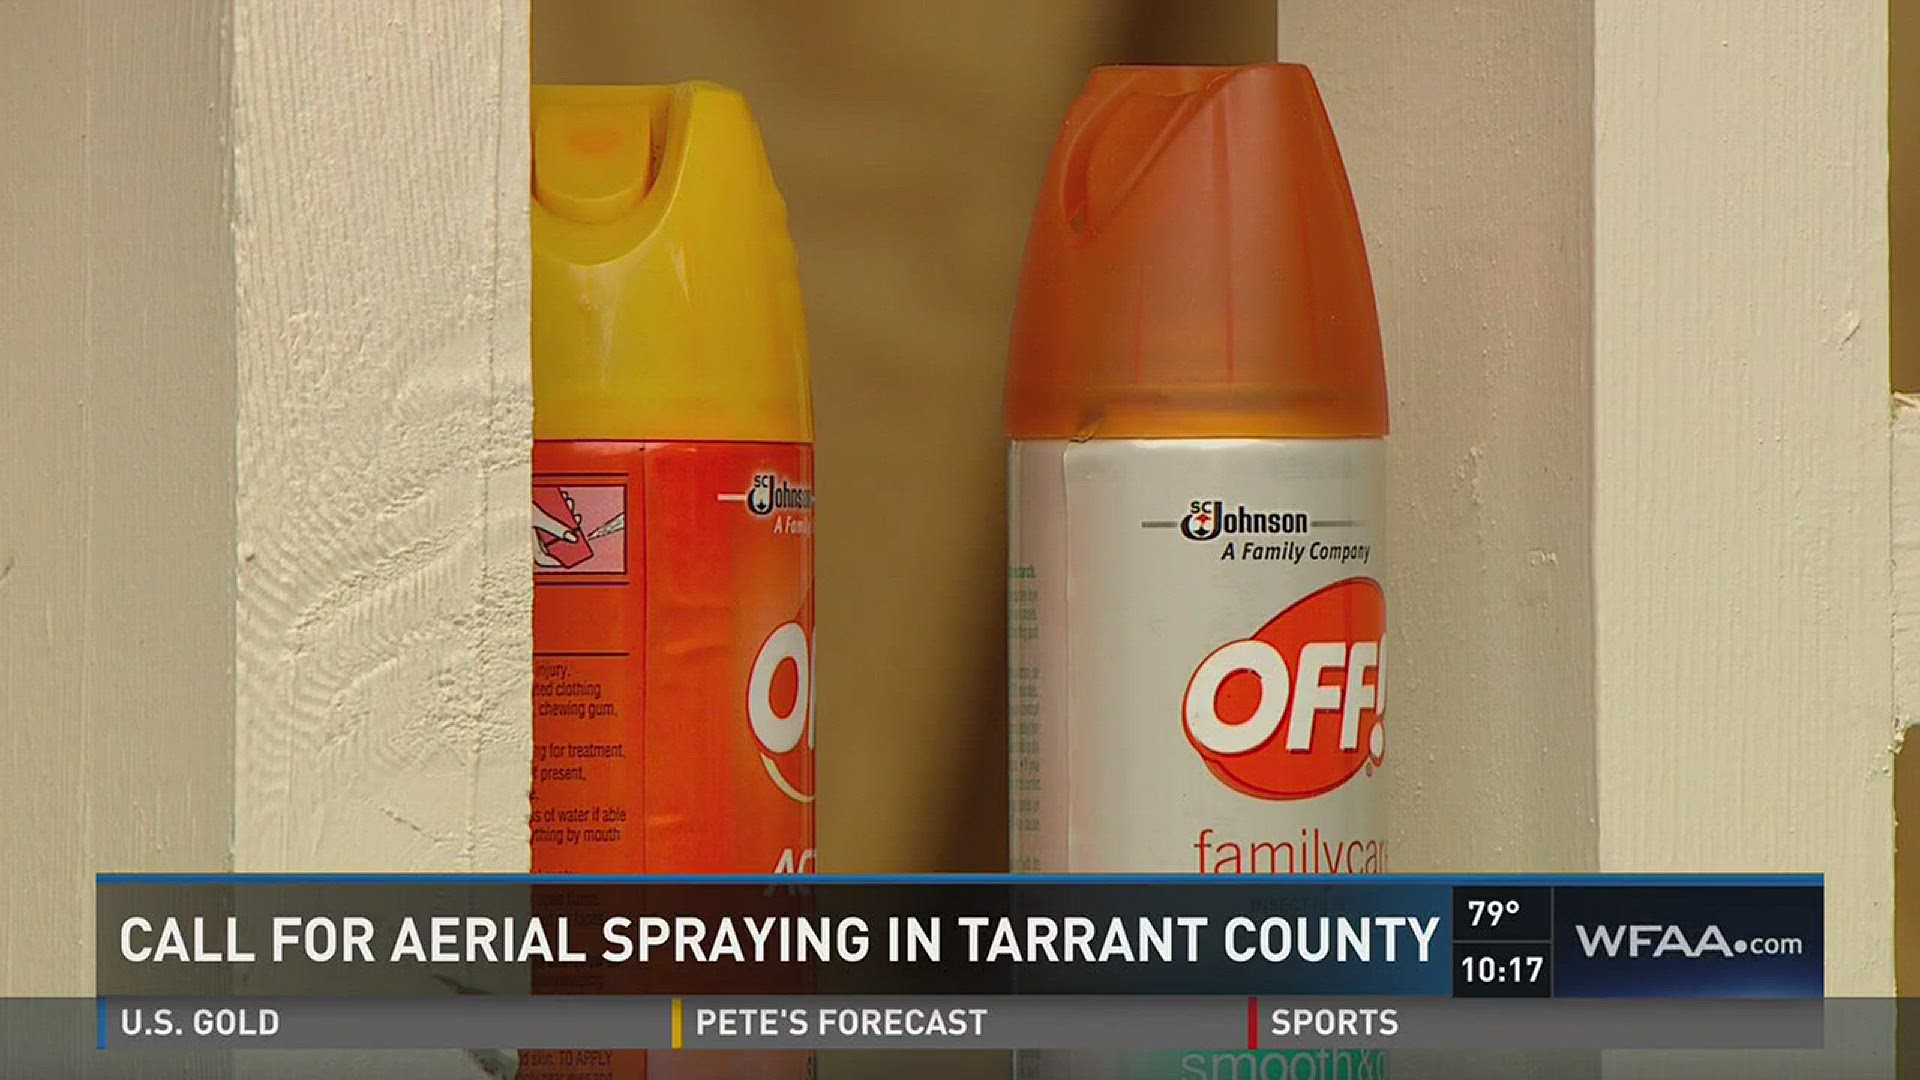 Call for aerial spraying in Tarrant County